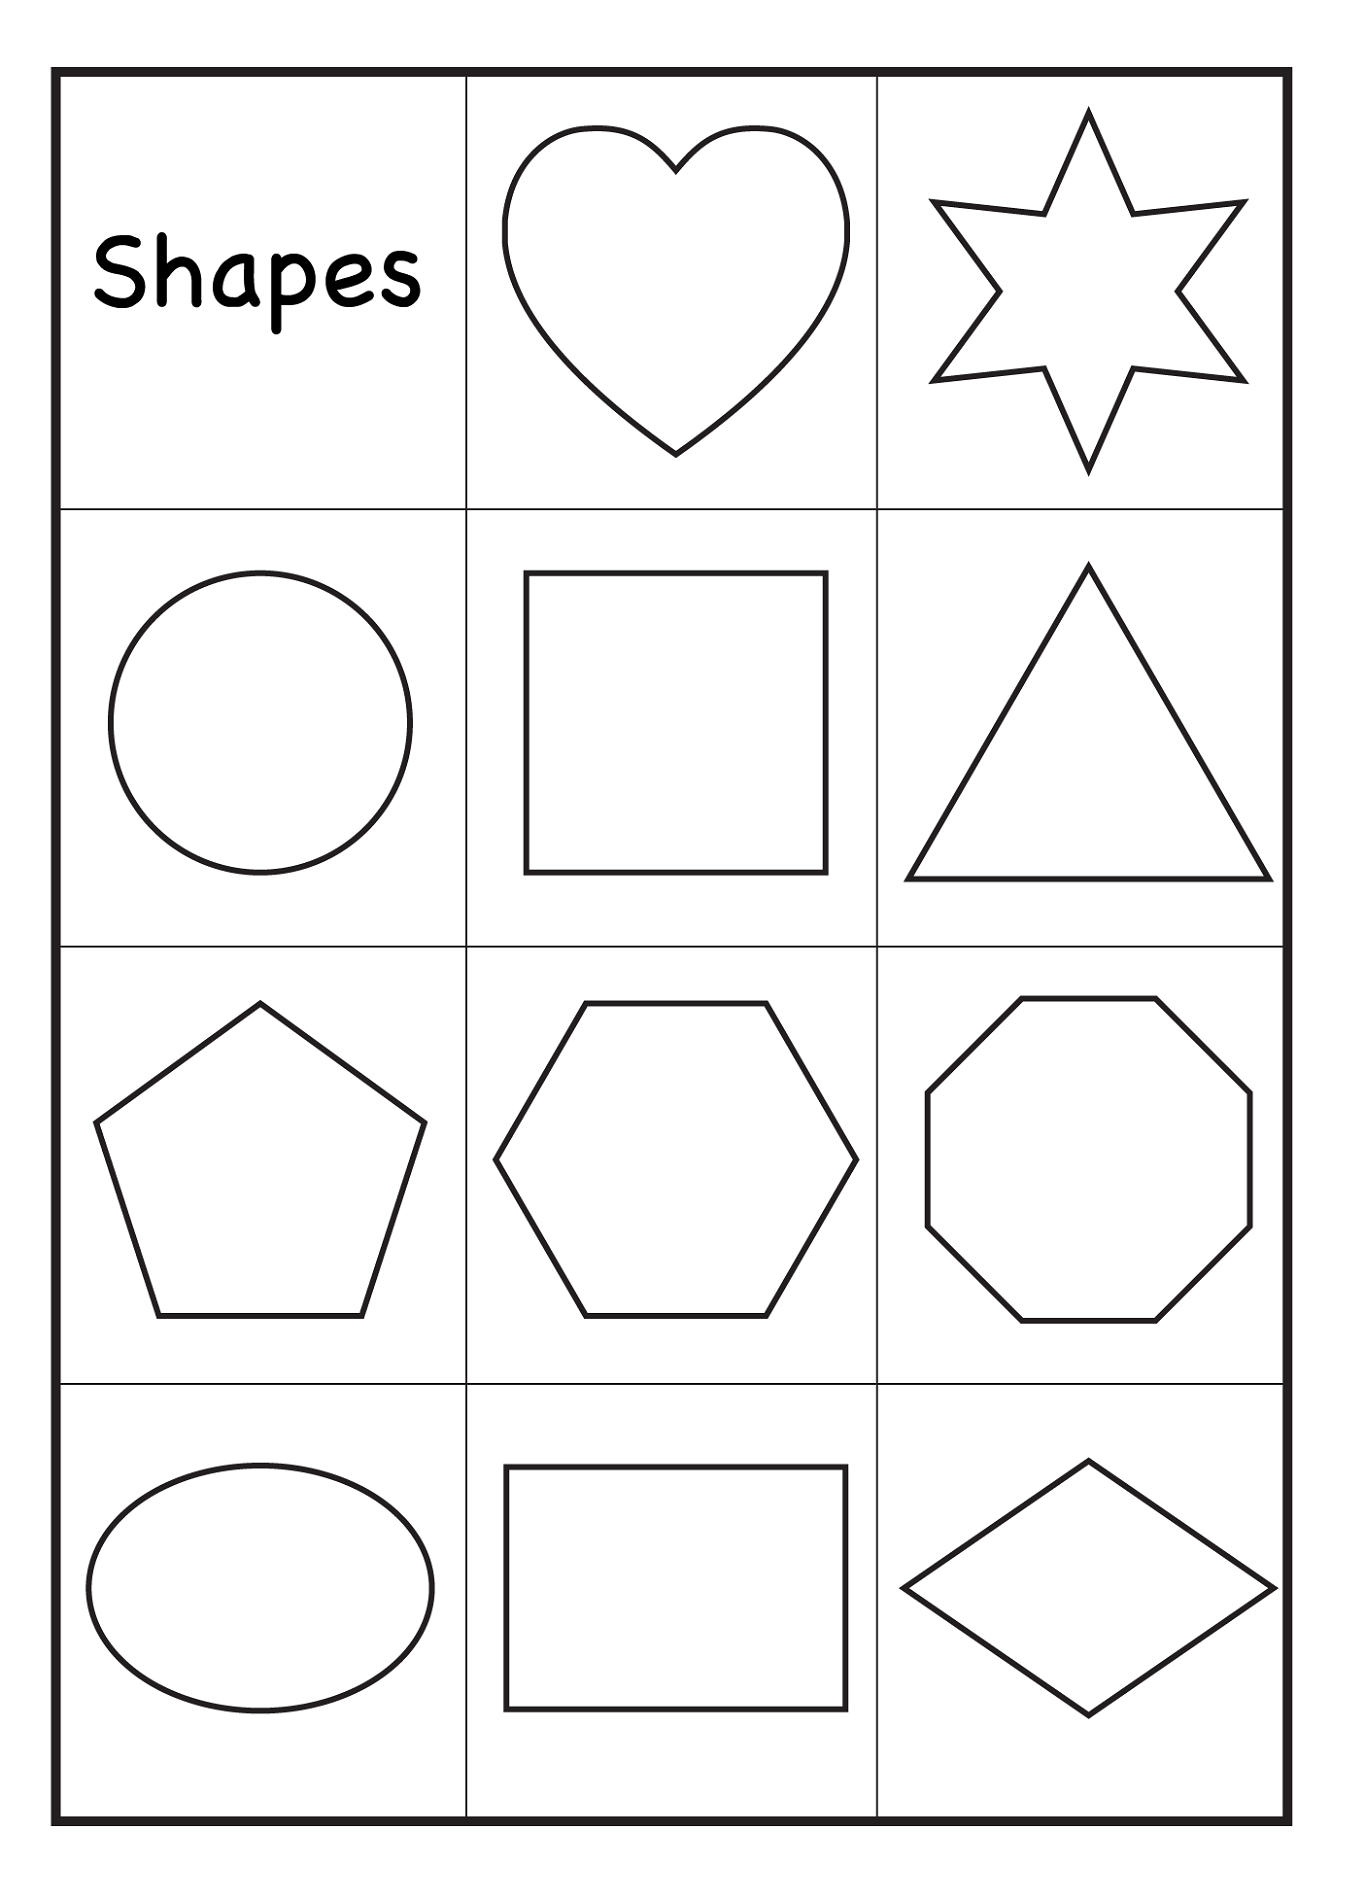 color-by-shape-worksheet-printable-001-coloring-sheets-oval-shape